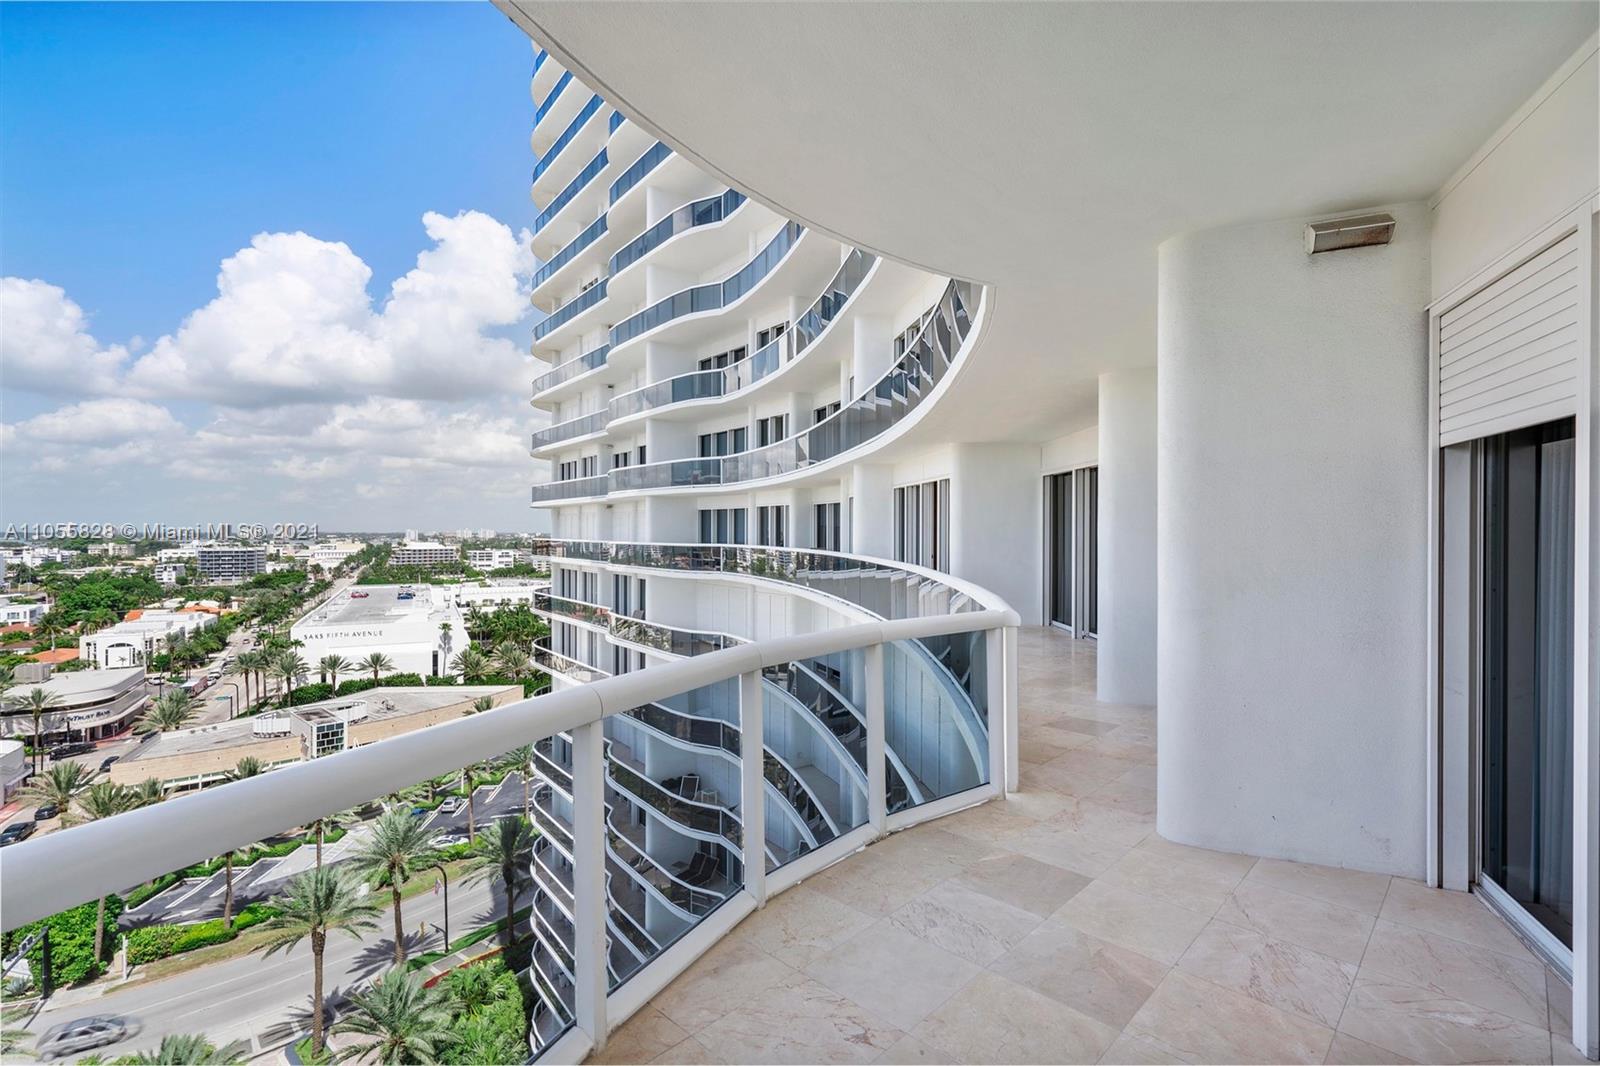 Photo 2 of Majestic Tower Apt 1208 in Bal Harbour - MLS A11055828